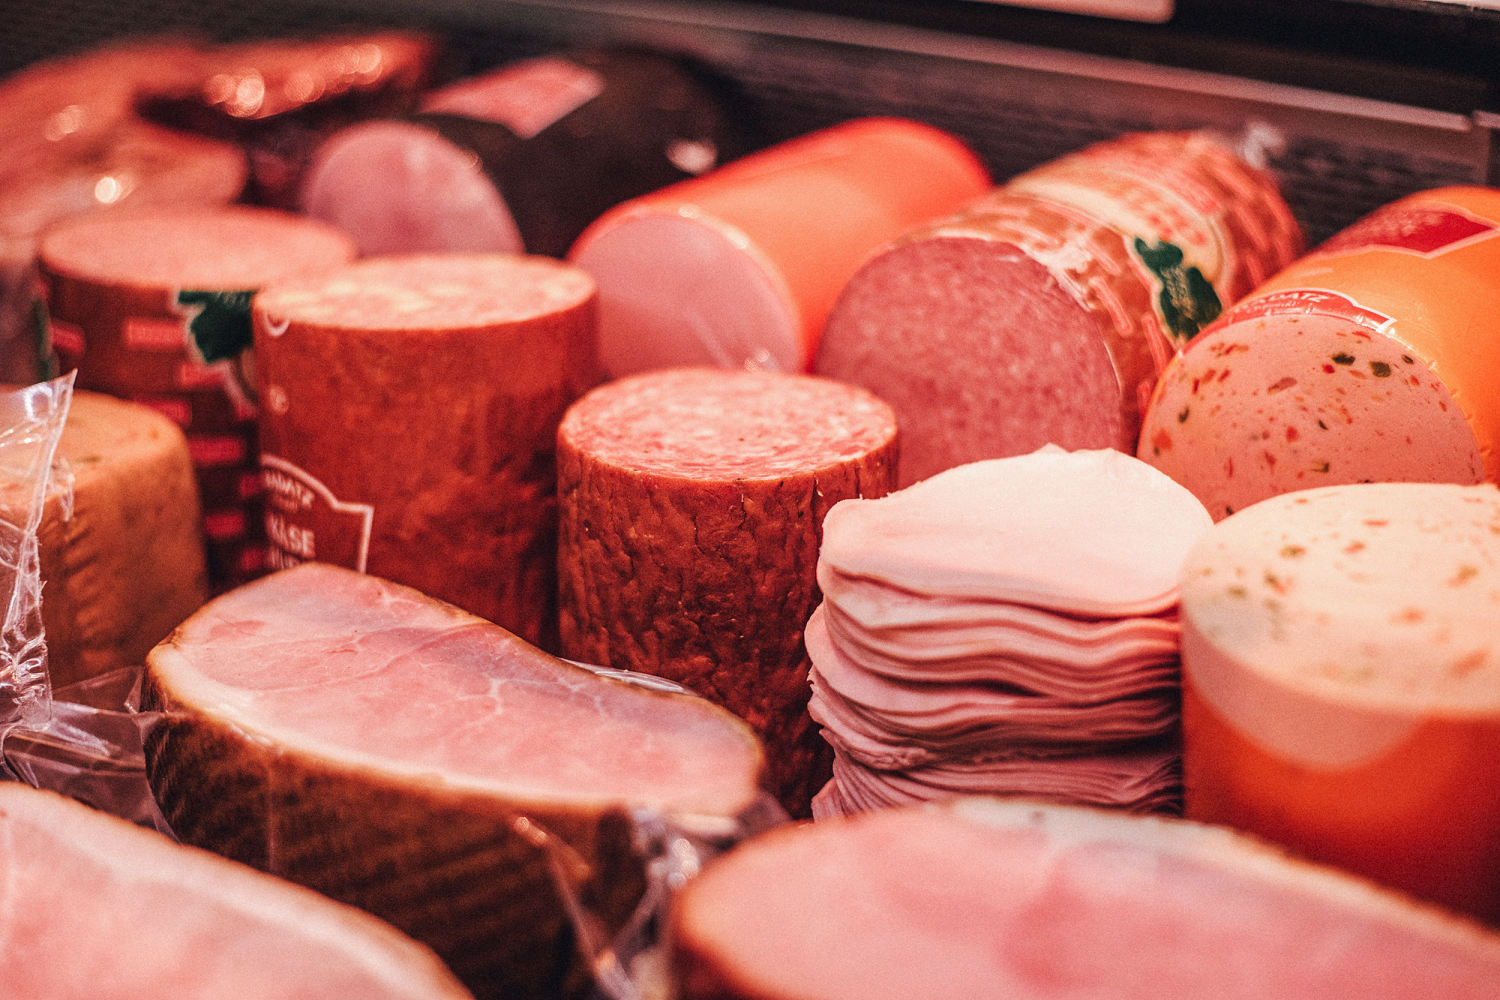 Boar's Head recall expands to include 7 million pounds of deli meat over listeria concerns